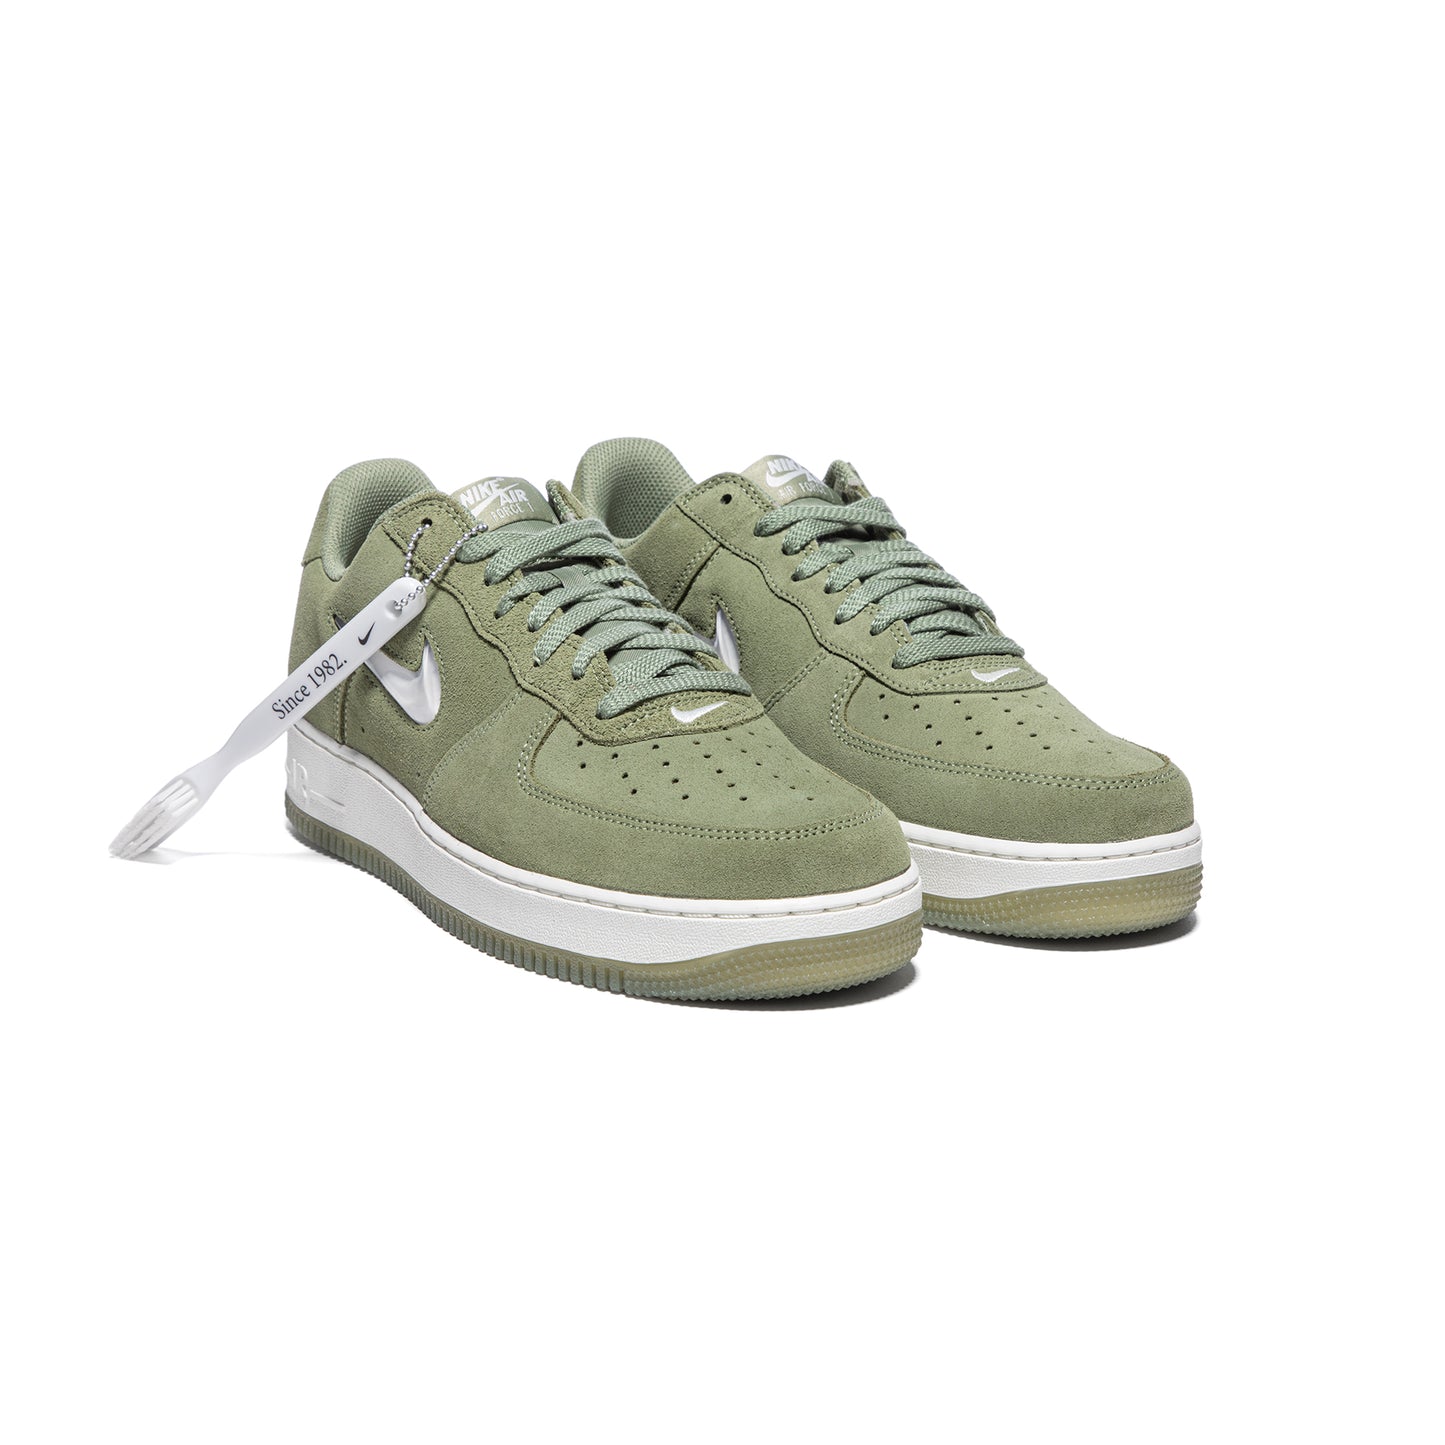 Nike Air Force 1 Low Retro (Oil Green/Summit White)